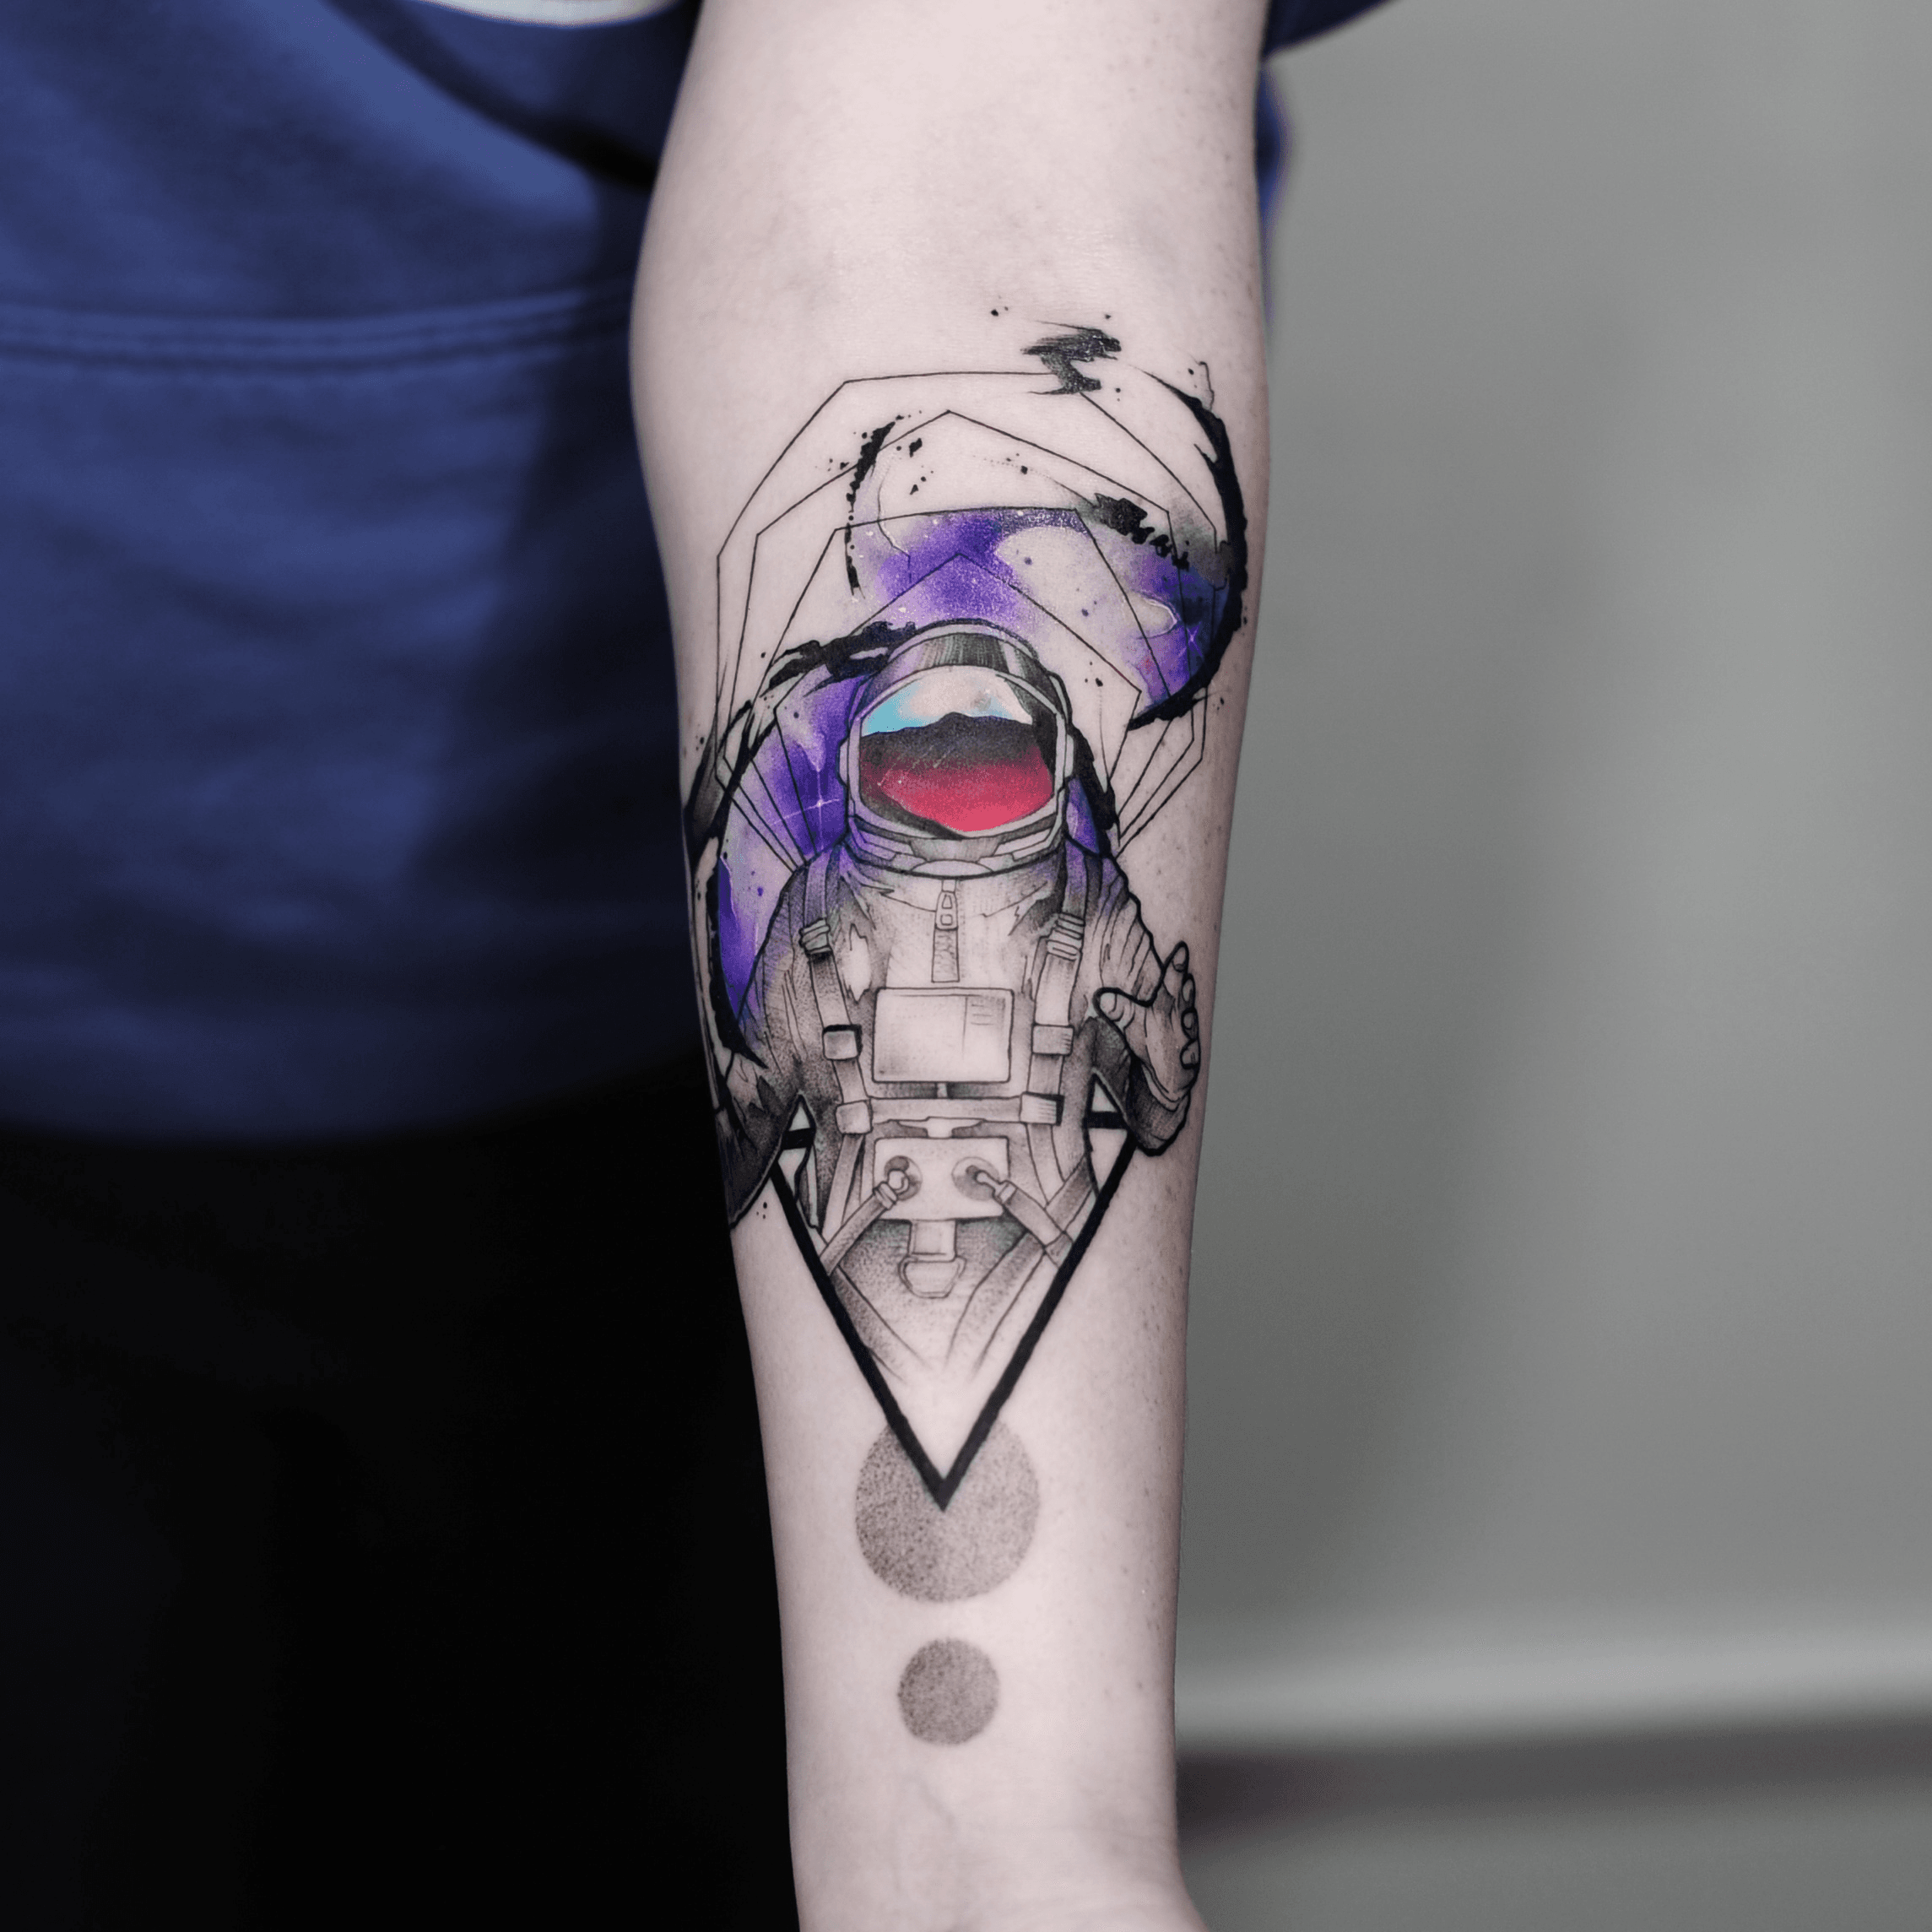 Surrealistpsychedelic astronaut tattoo on the right